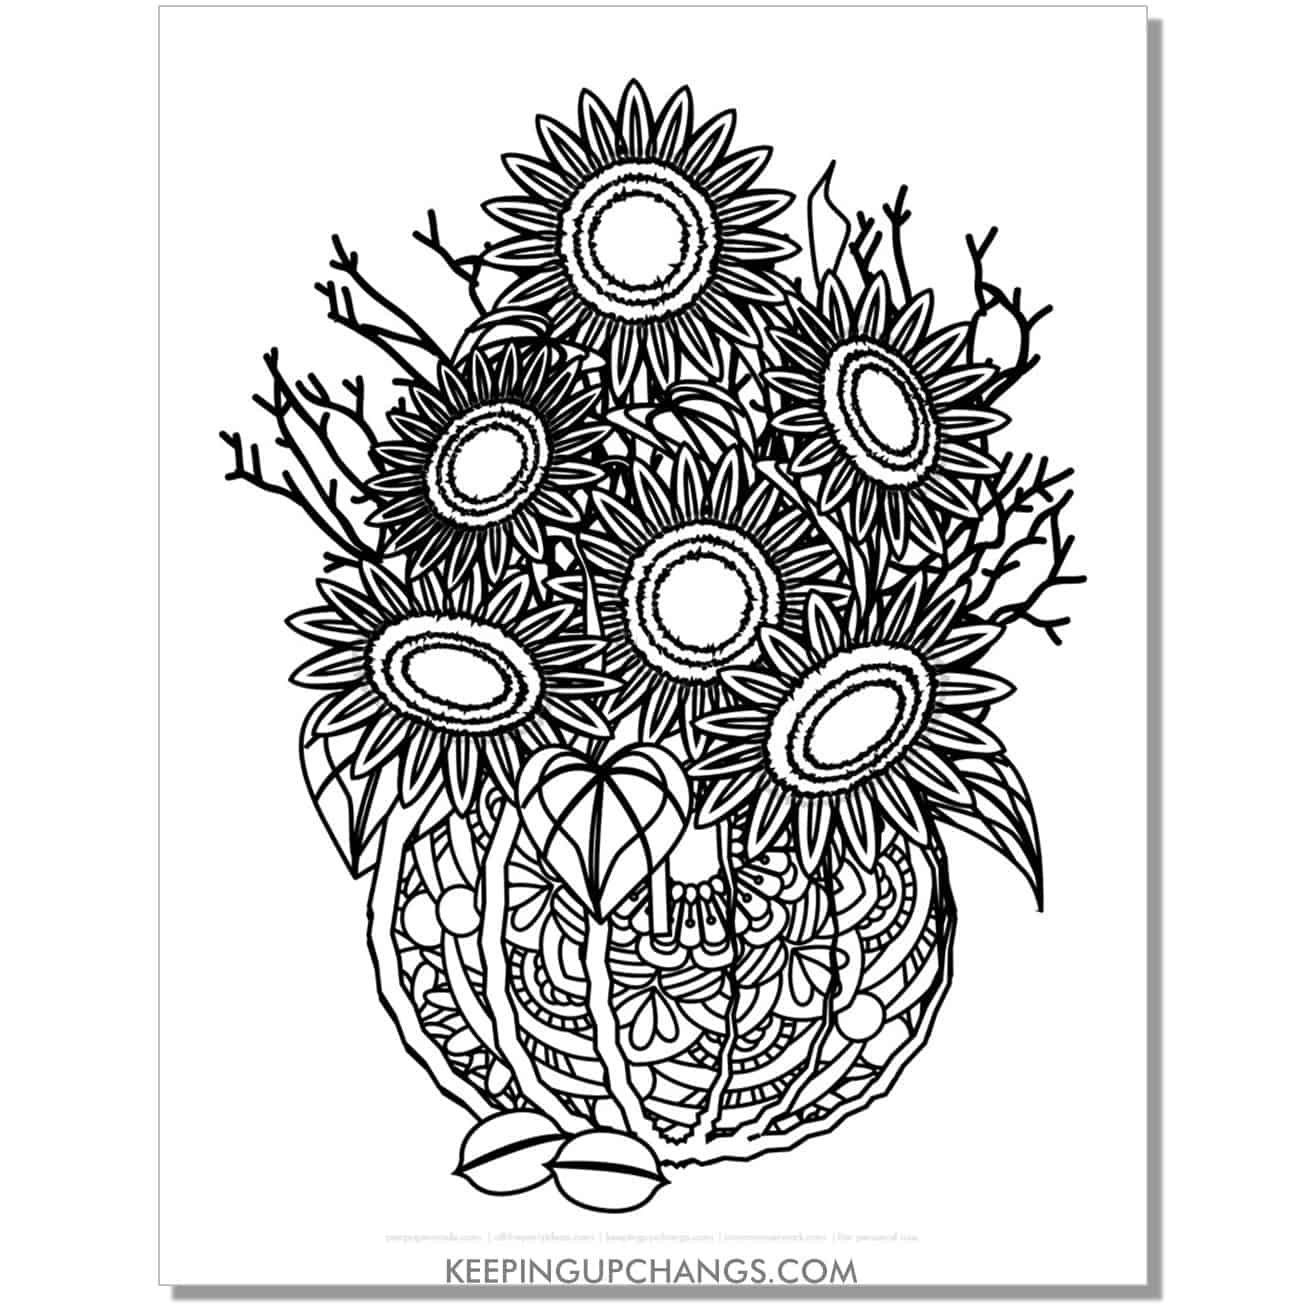 free zentangle fall, thanksgiving pumpkin coloring page for adults with sunflowers.